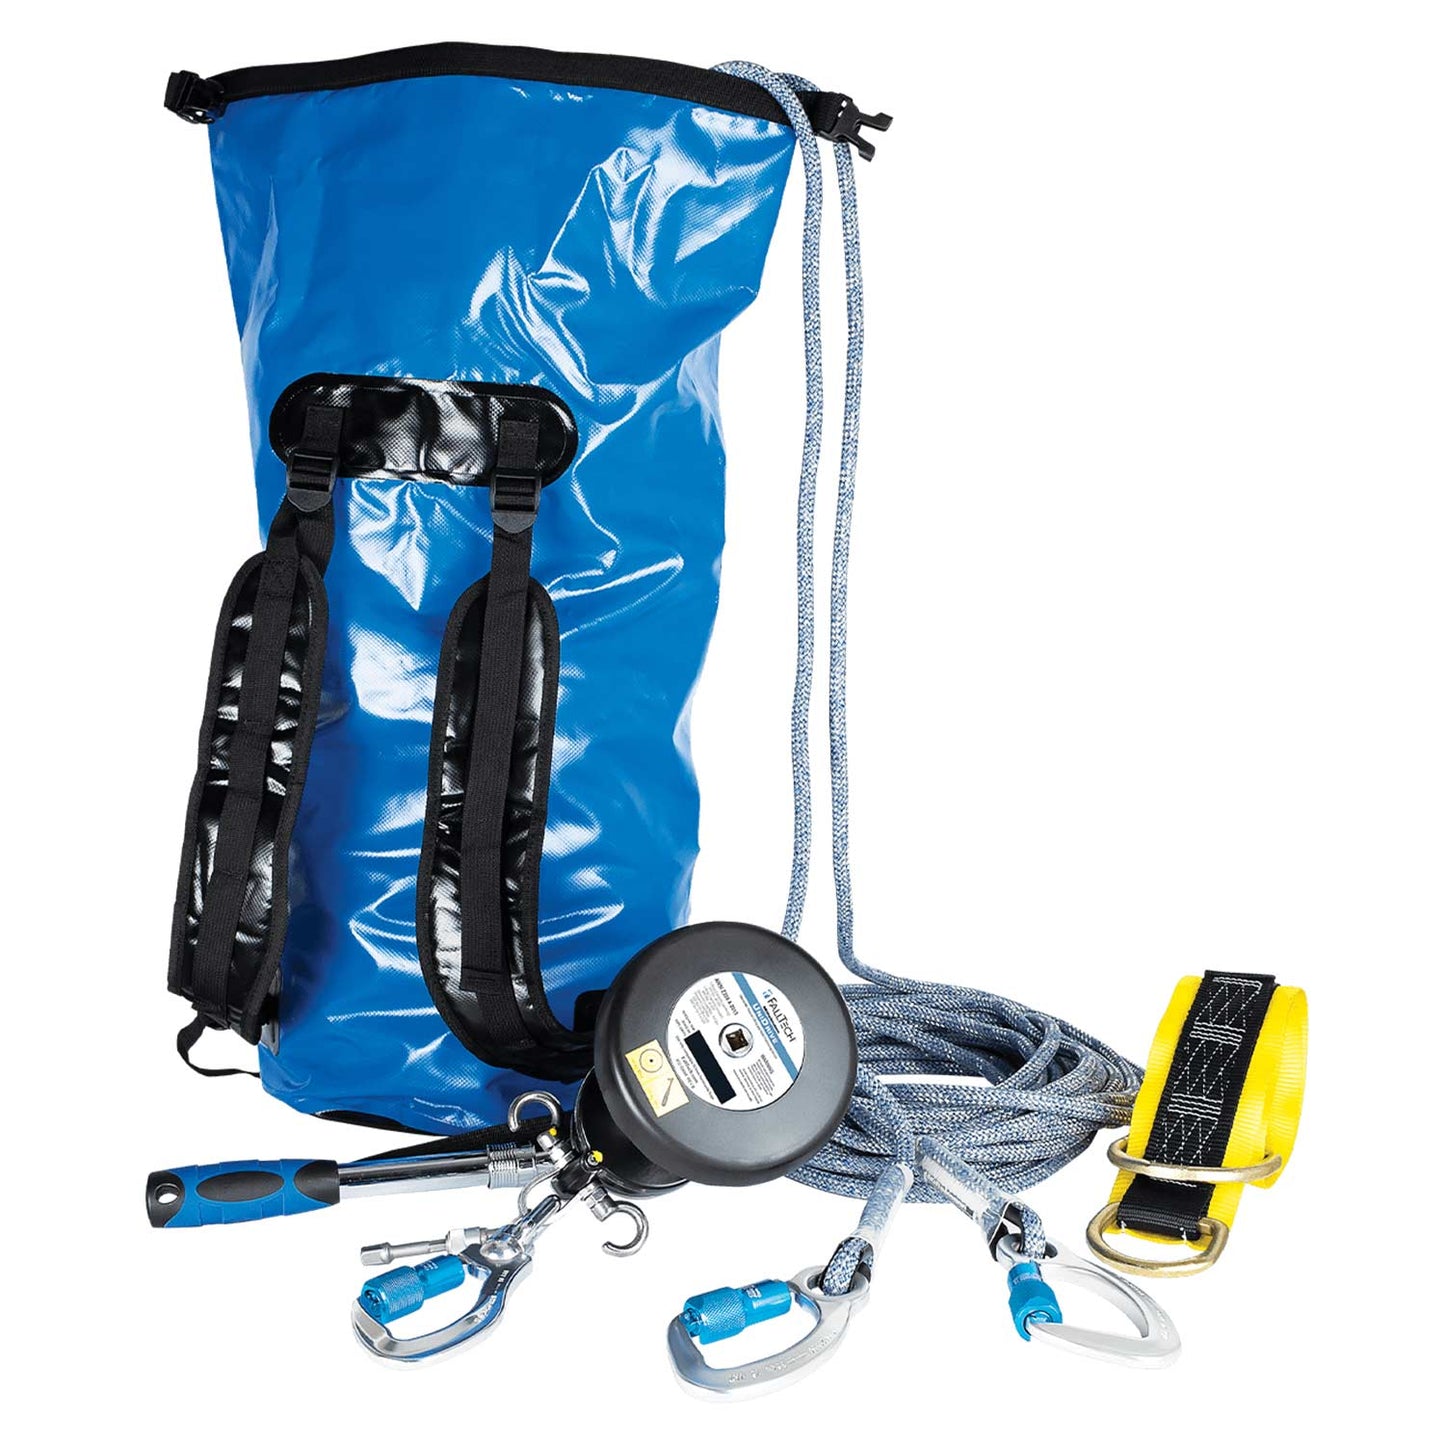 FallTech 50' Demo/Training Fall Protection Rescue Equipment Kit with Bag | 681450K